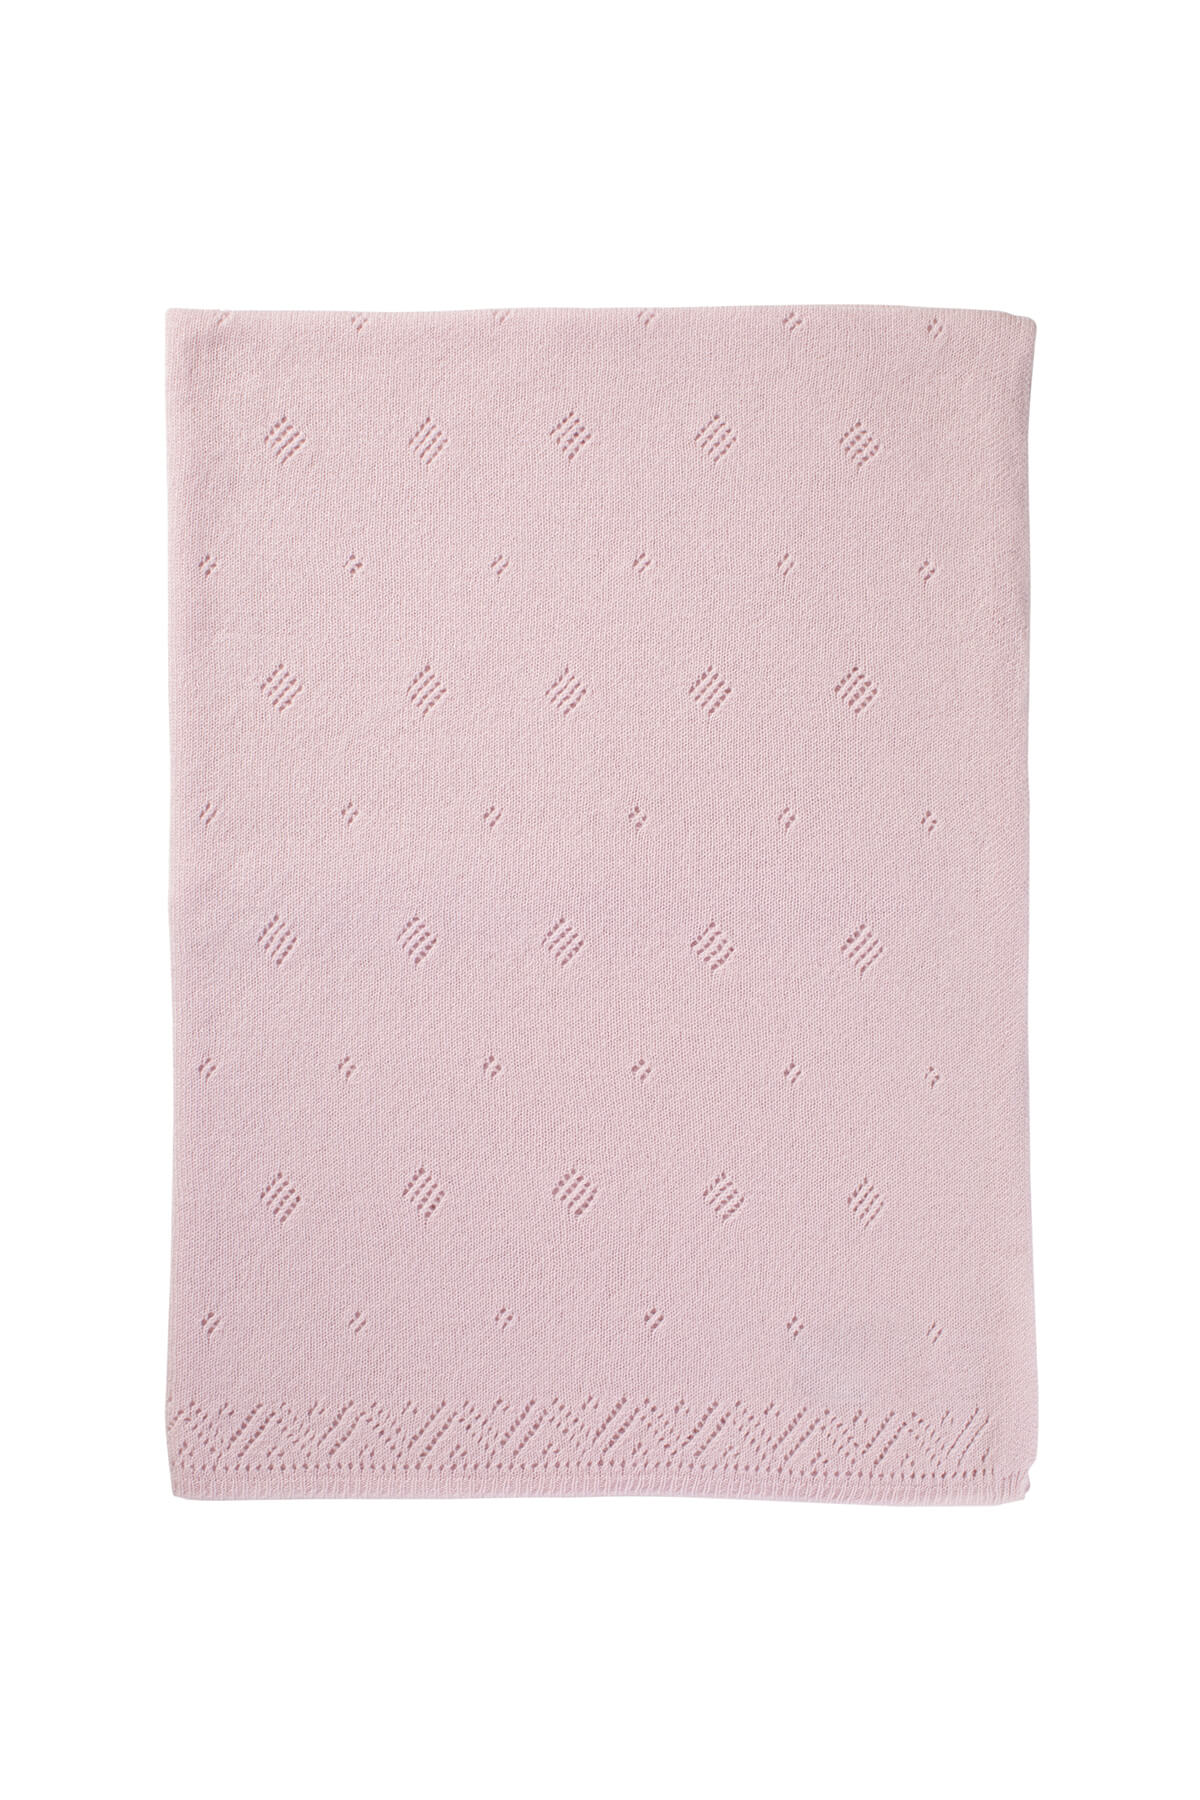 Johnstons of Elgin Gauzy Knit Cashmere Baby Blanket with Pointelle Details in Blush on white background HAA01904SE0208ONE